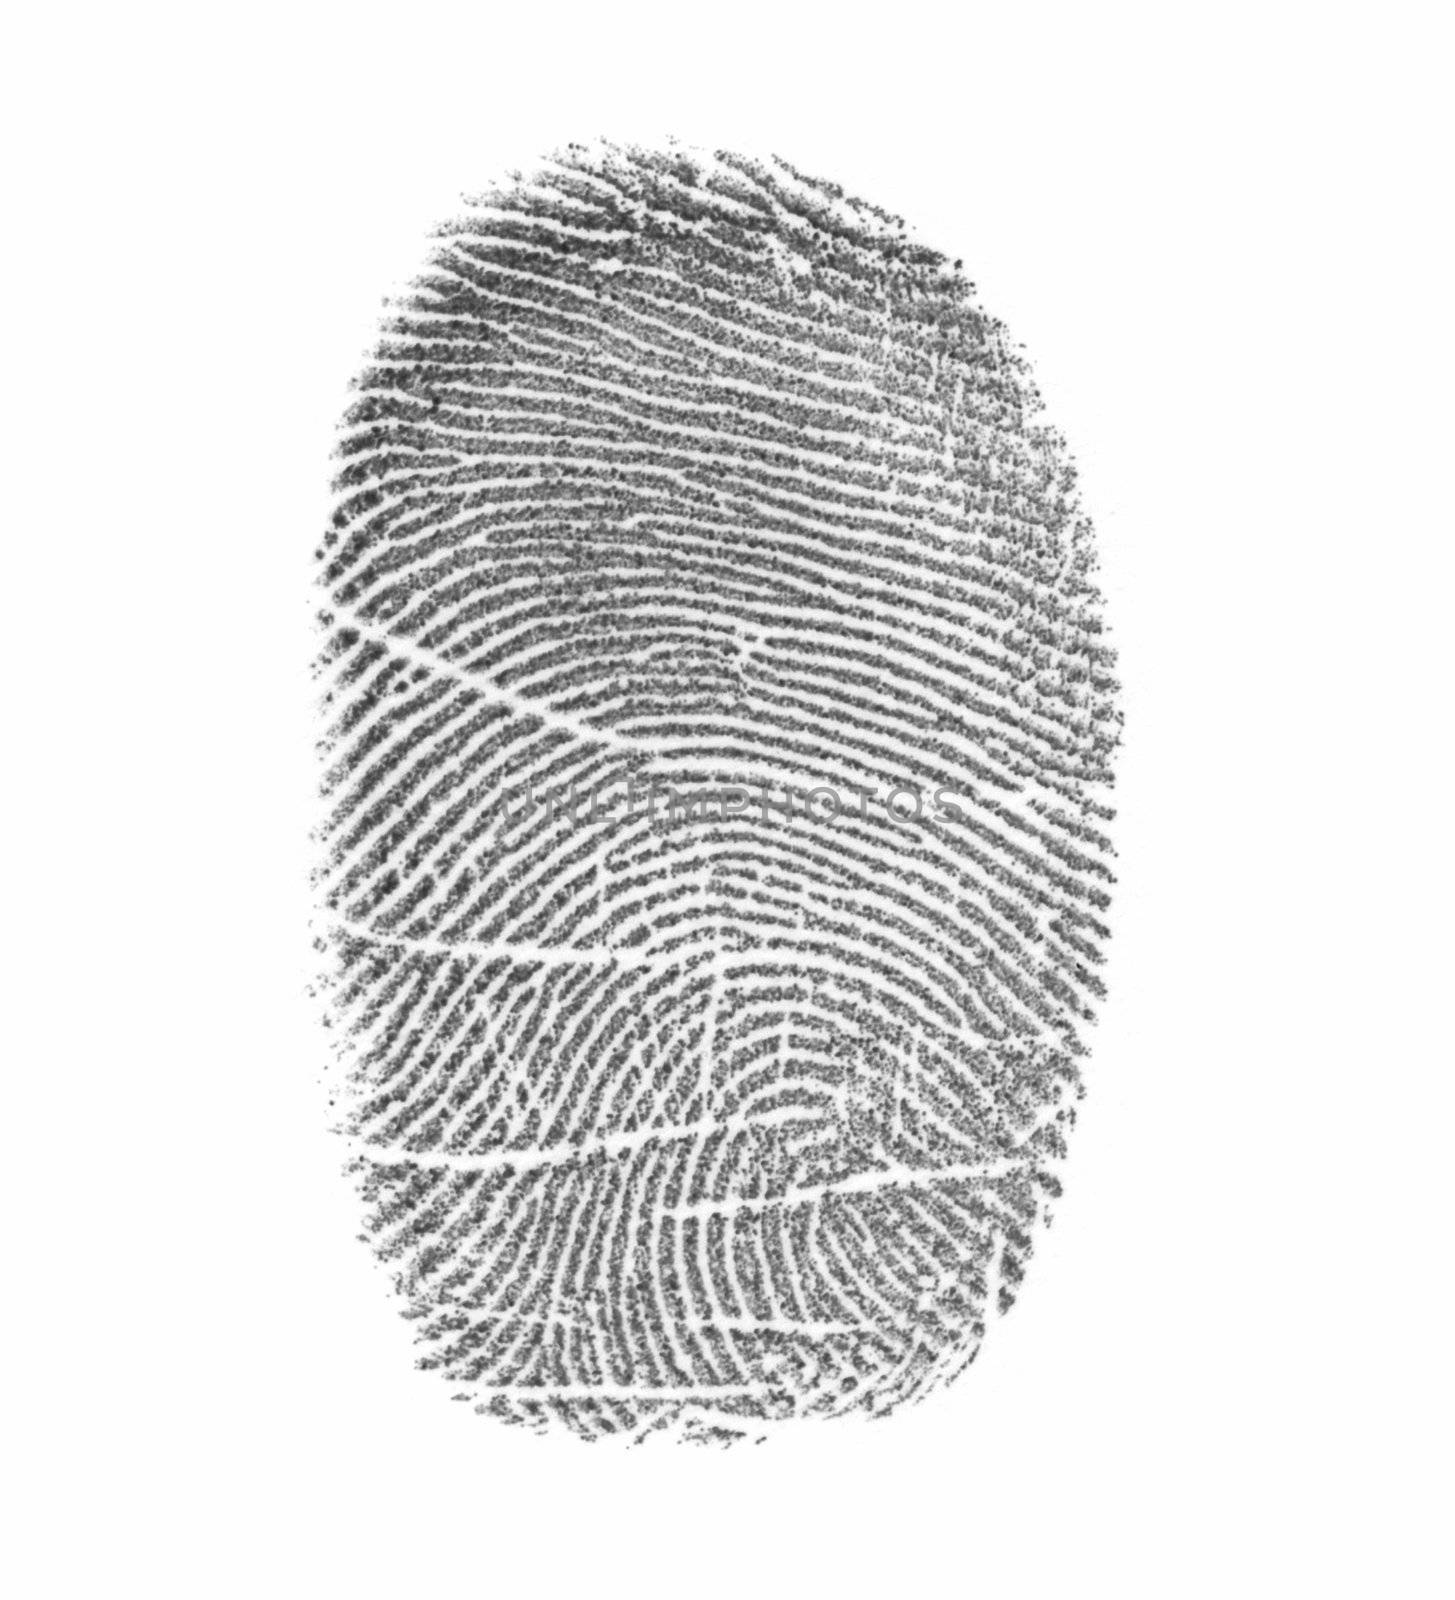 Fingerprint on a surface of a white paper